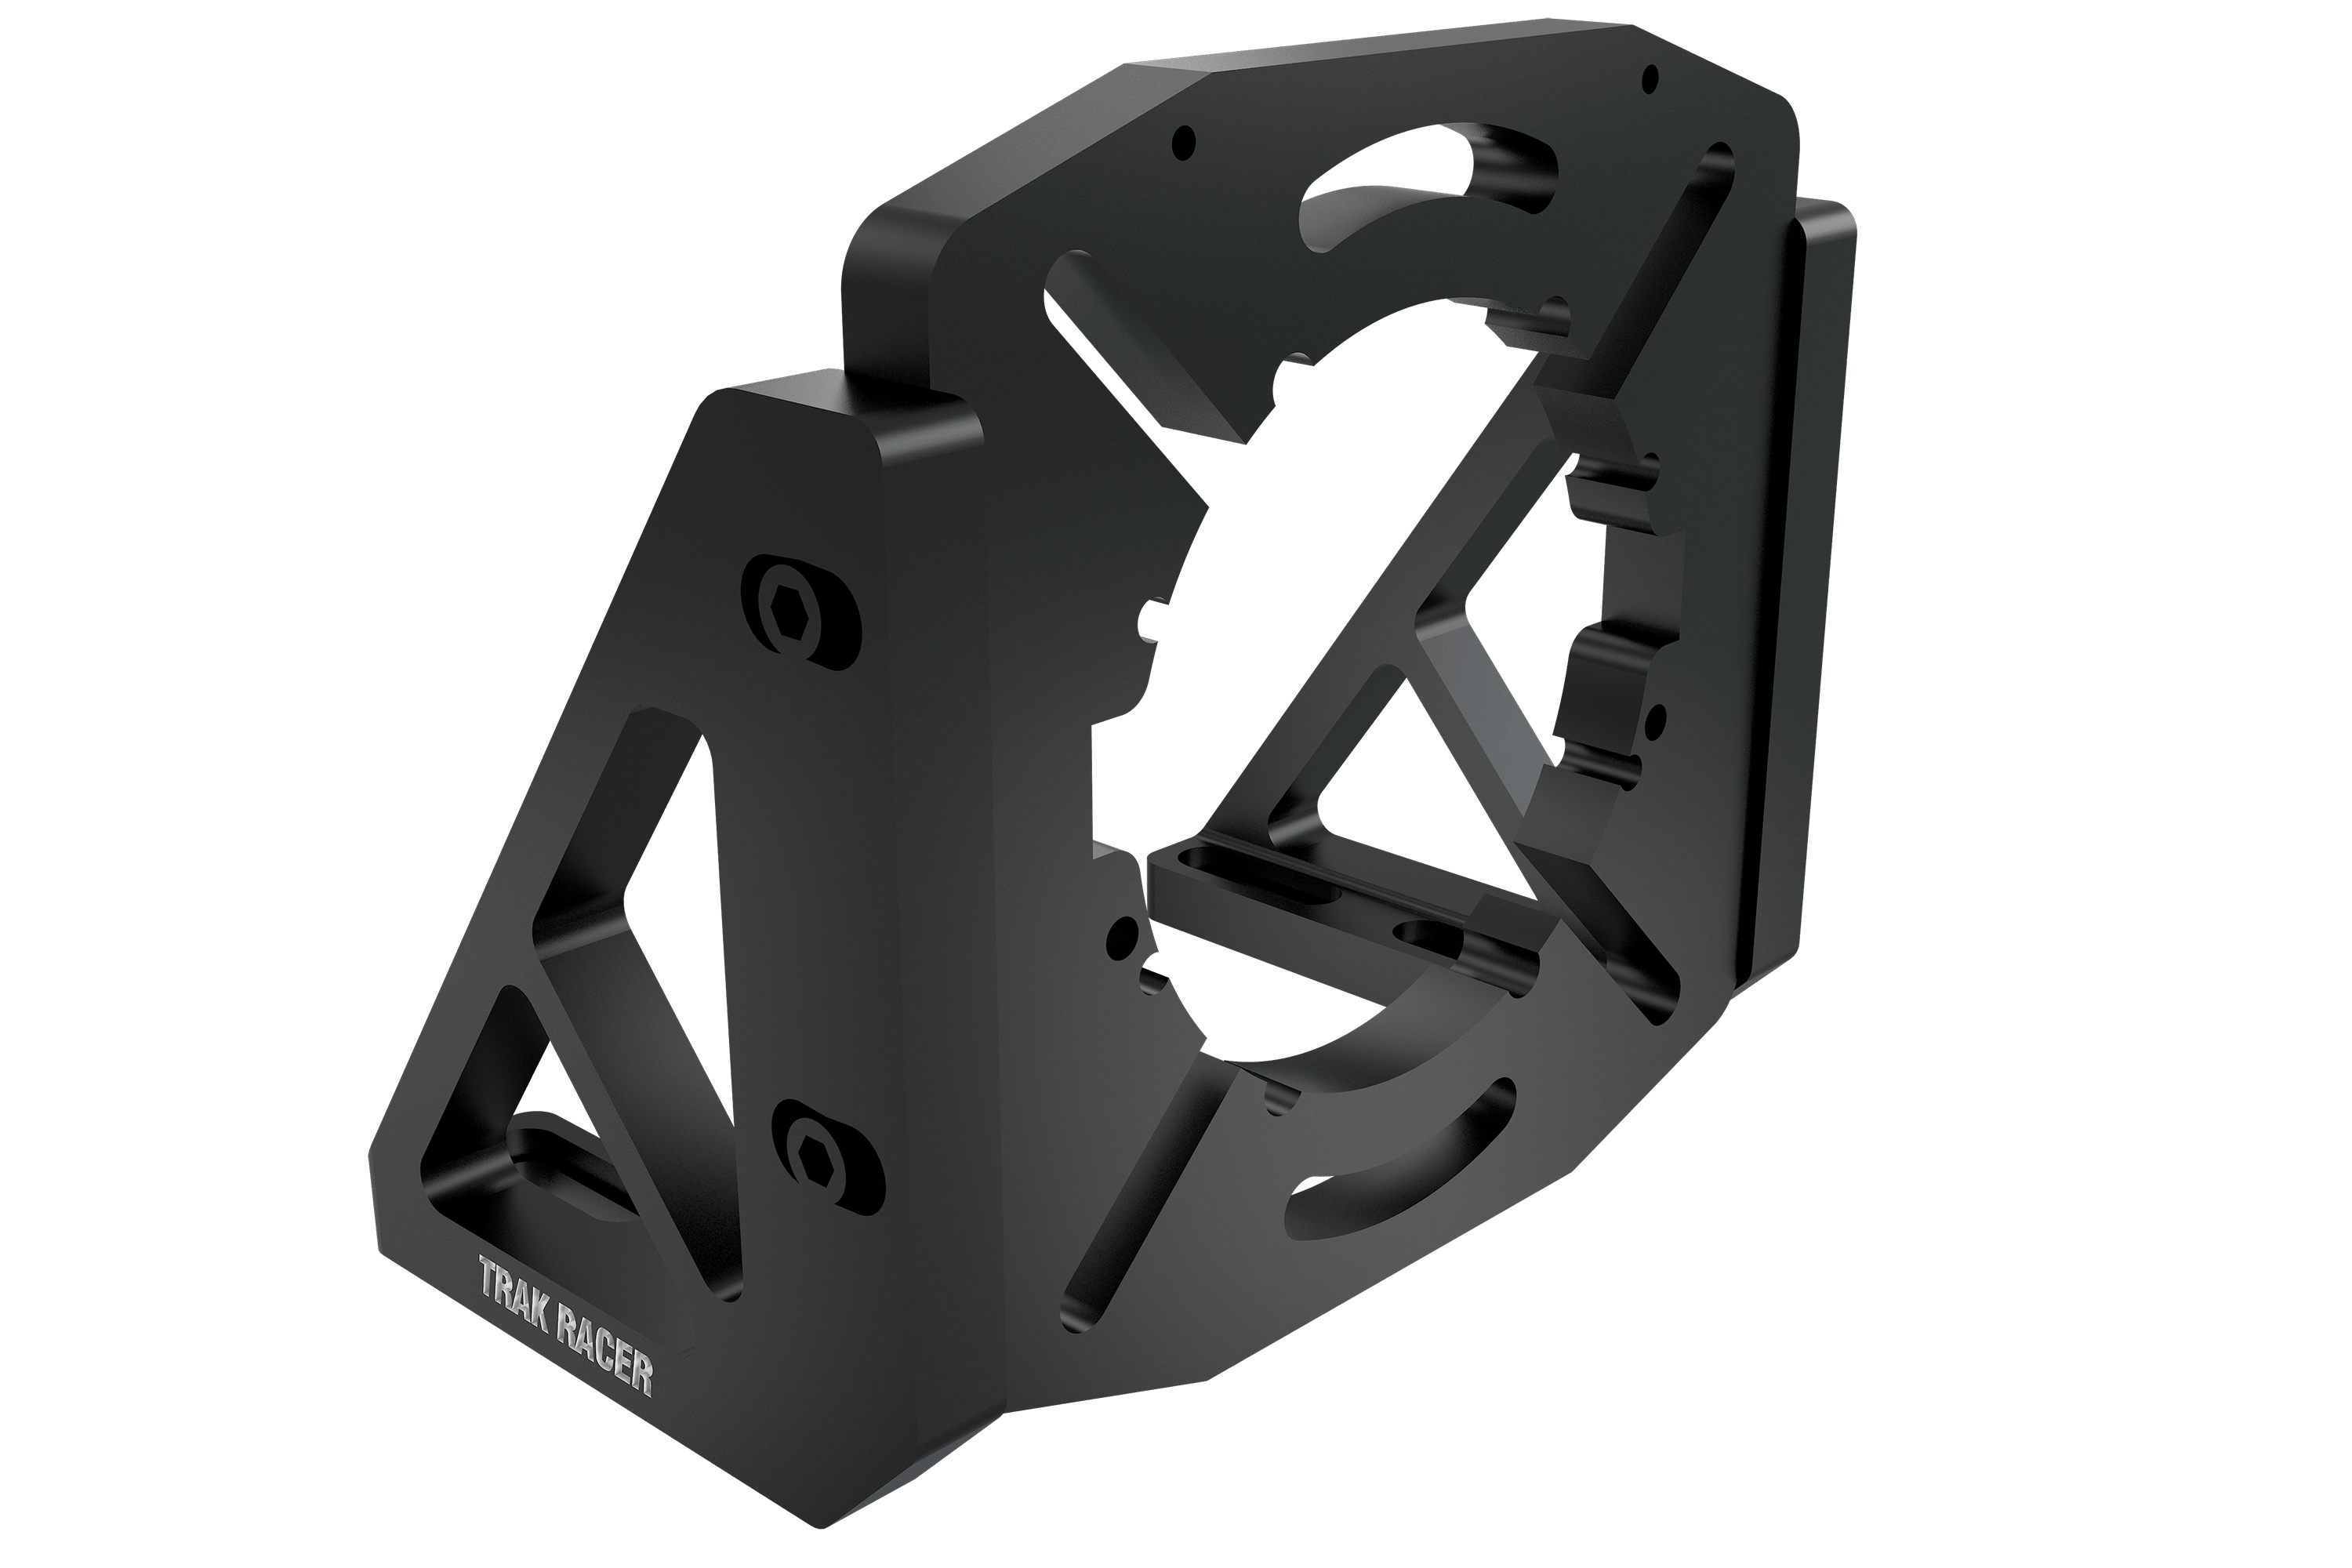 Universal Direct Motor Mount for Simucube, Simucube 2, VRS, Simagic, MIGE, Fanatec and more